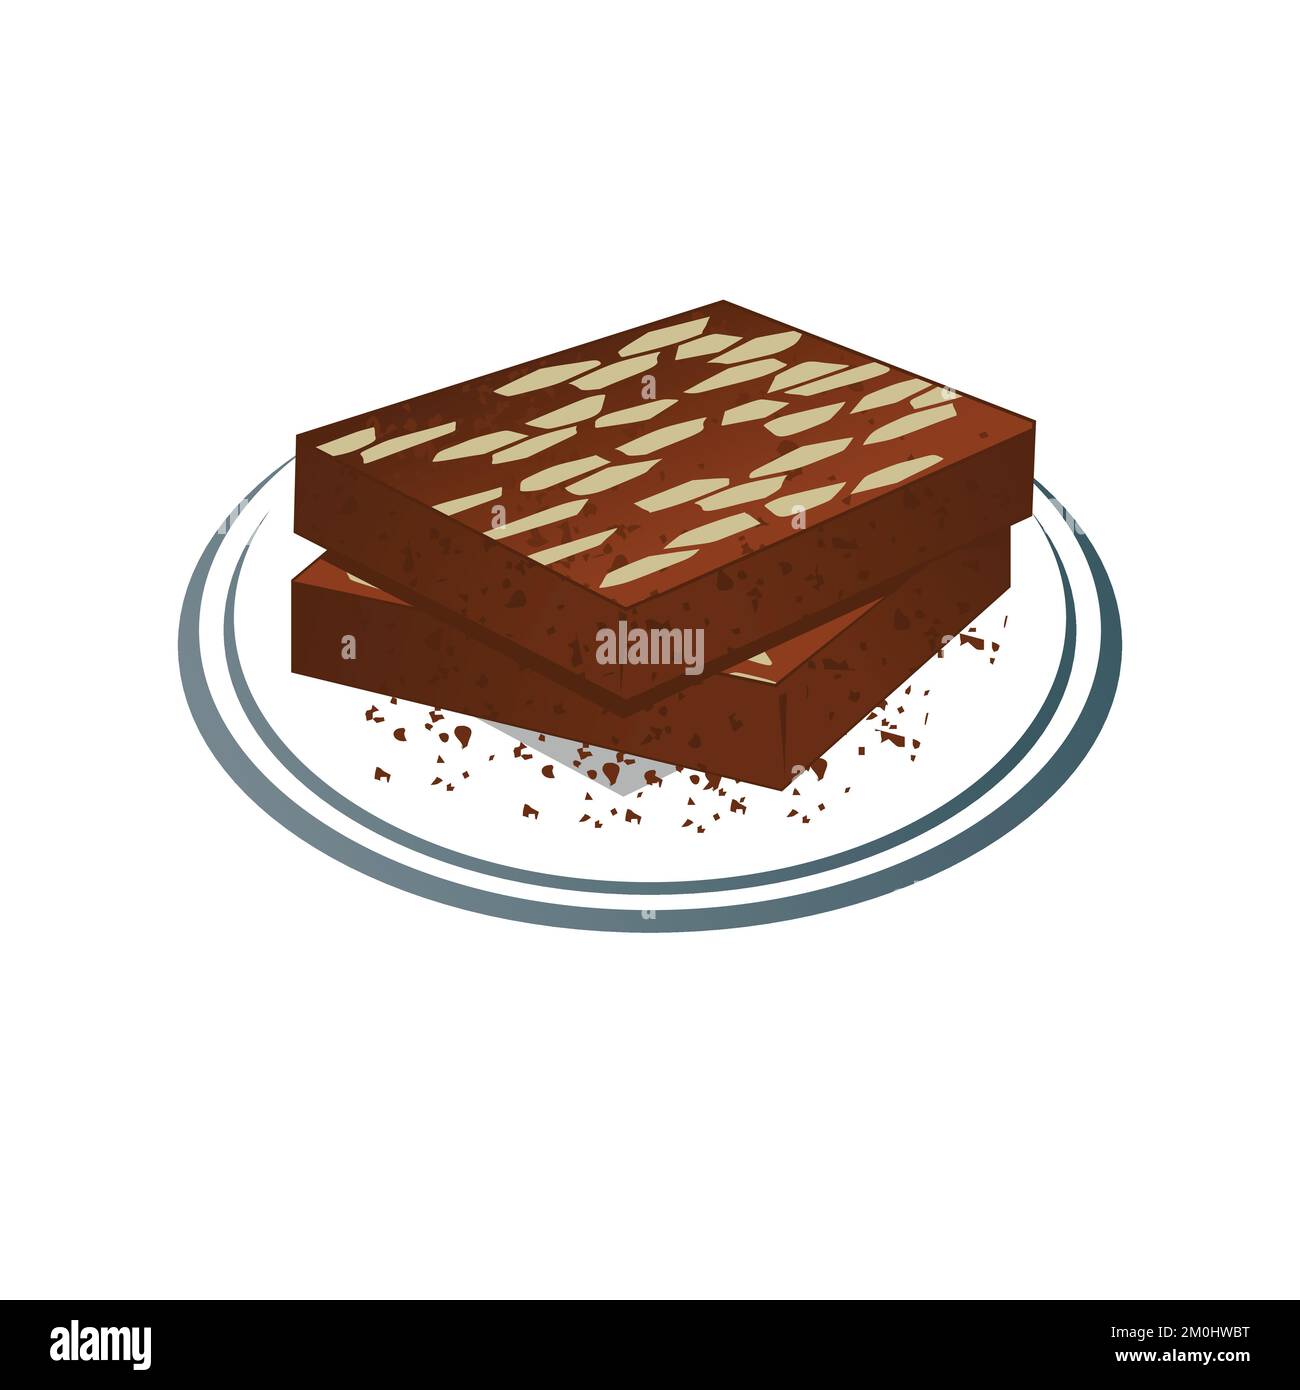 Two pieces of chocolate mosaico cake on a plate. Vector illustration of Greek cuisine. Stock Vector